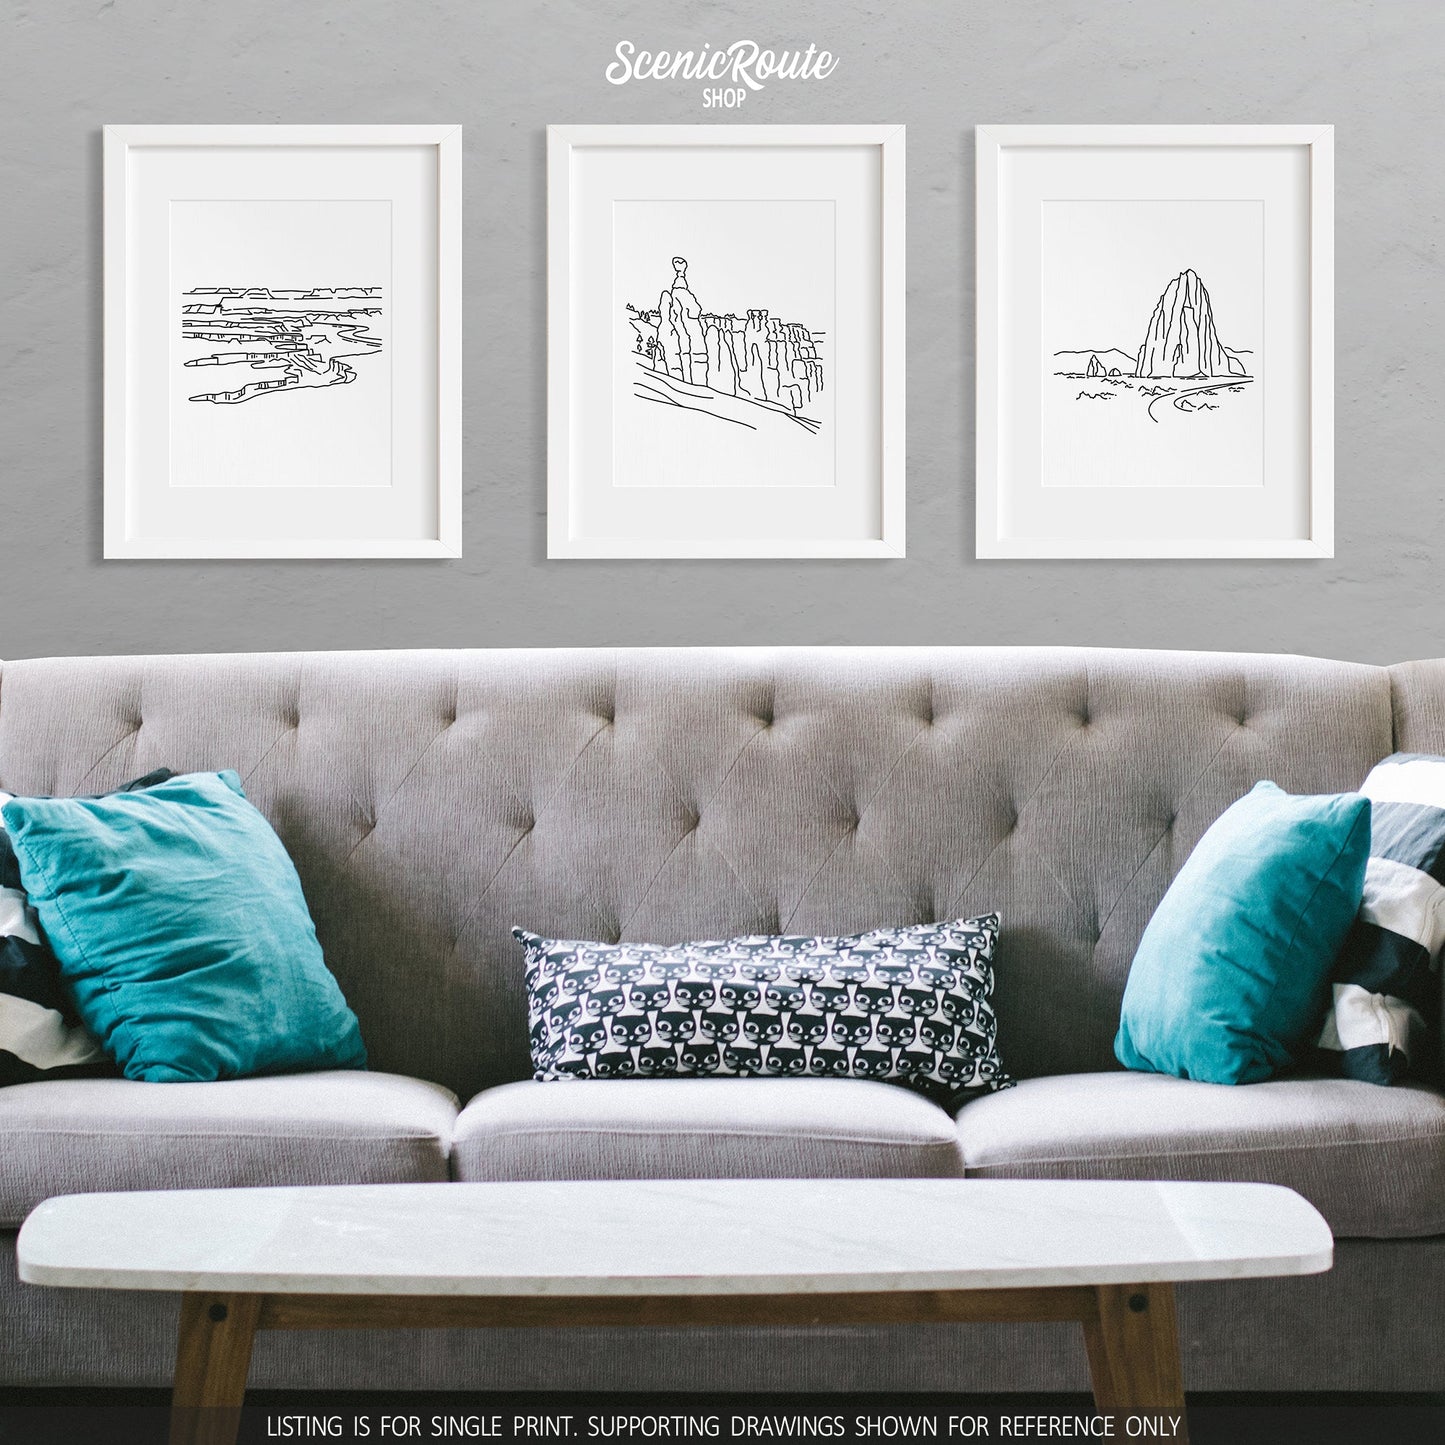 A group of three framed drawings on a wall above a couch. The line art drawings include Canyonlands National Park, Bryce Canyon National Park, and Capitol Reef National Park